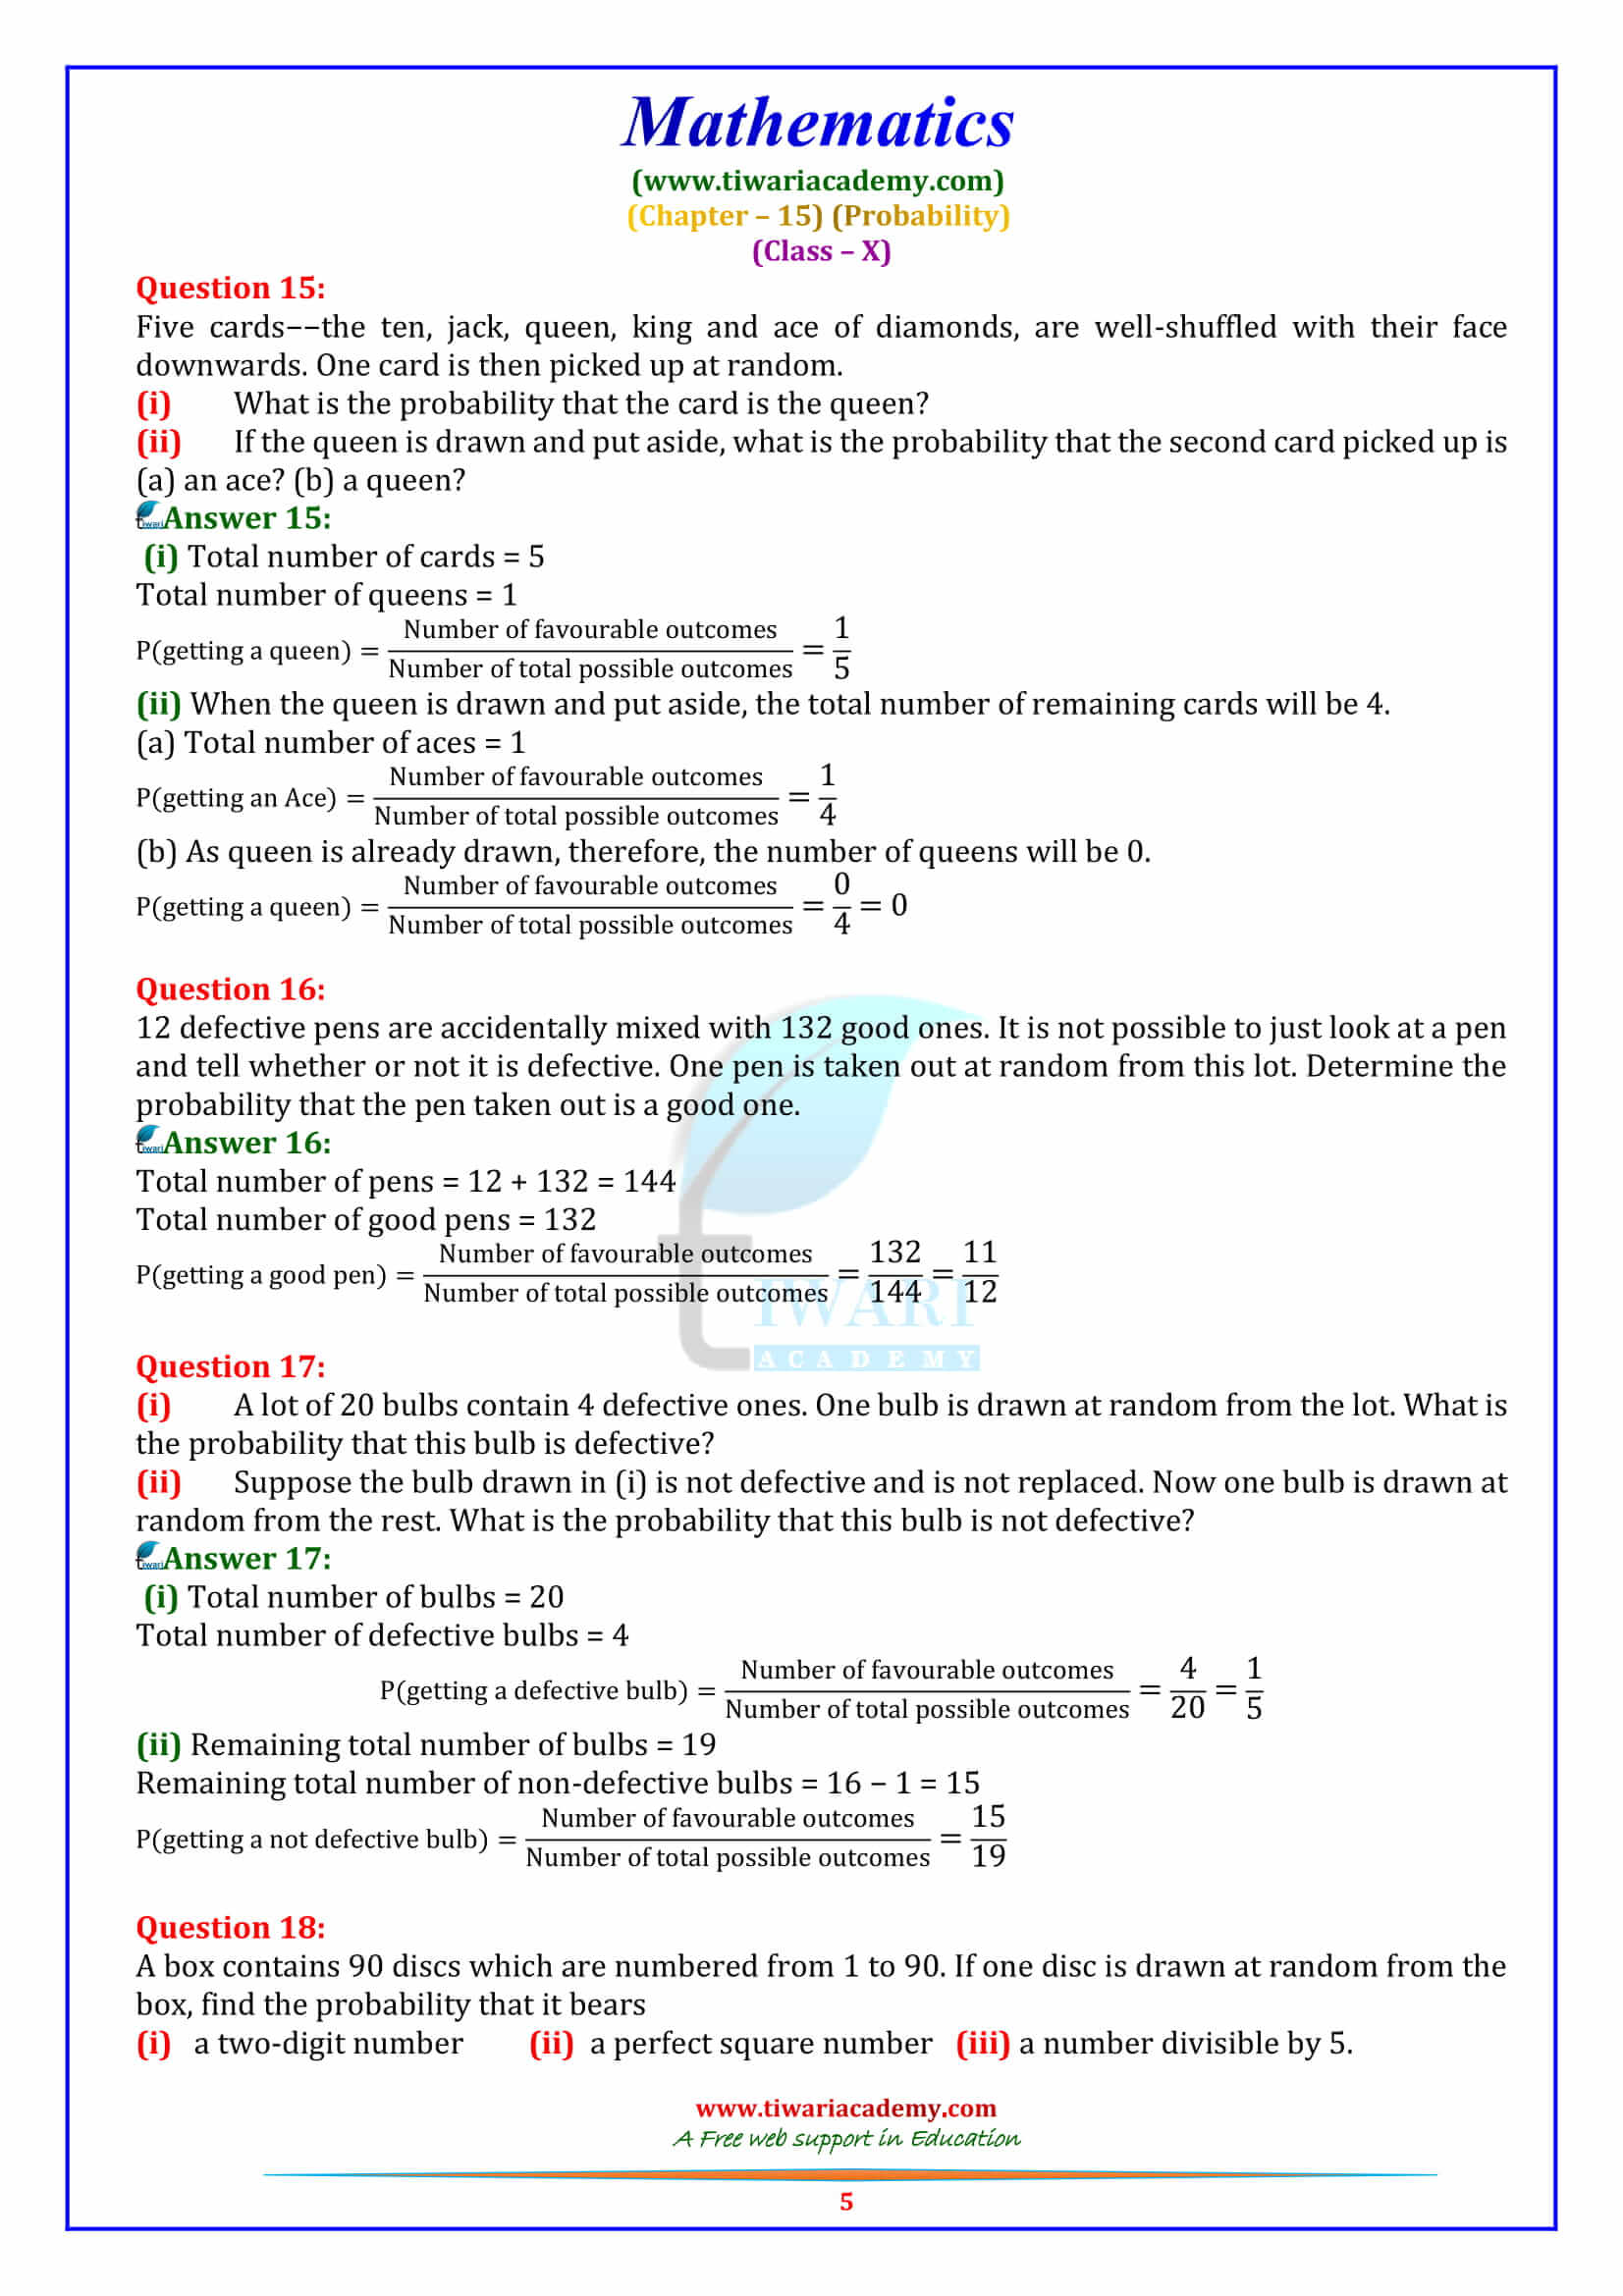 NCERT Solutions for Class 10 Maths Chapter 15 Exercise 15.1 in free pdf form